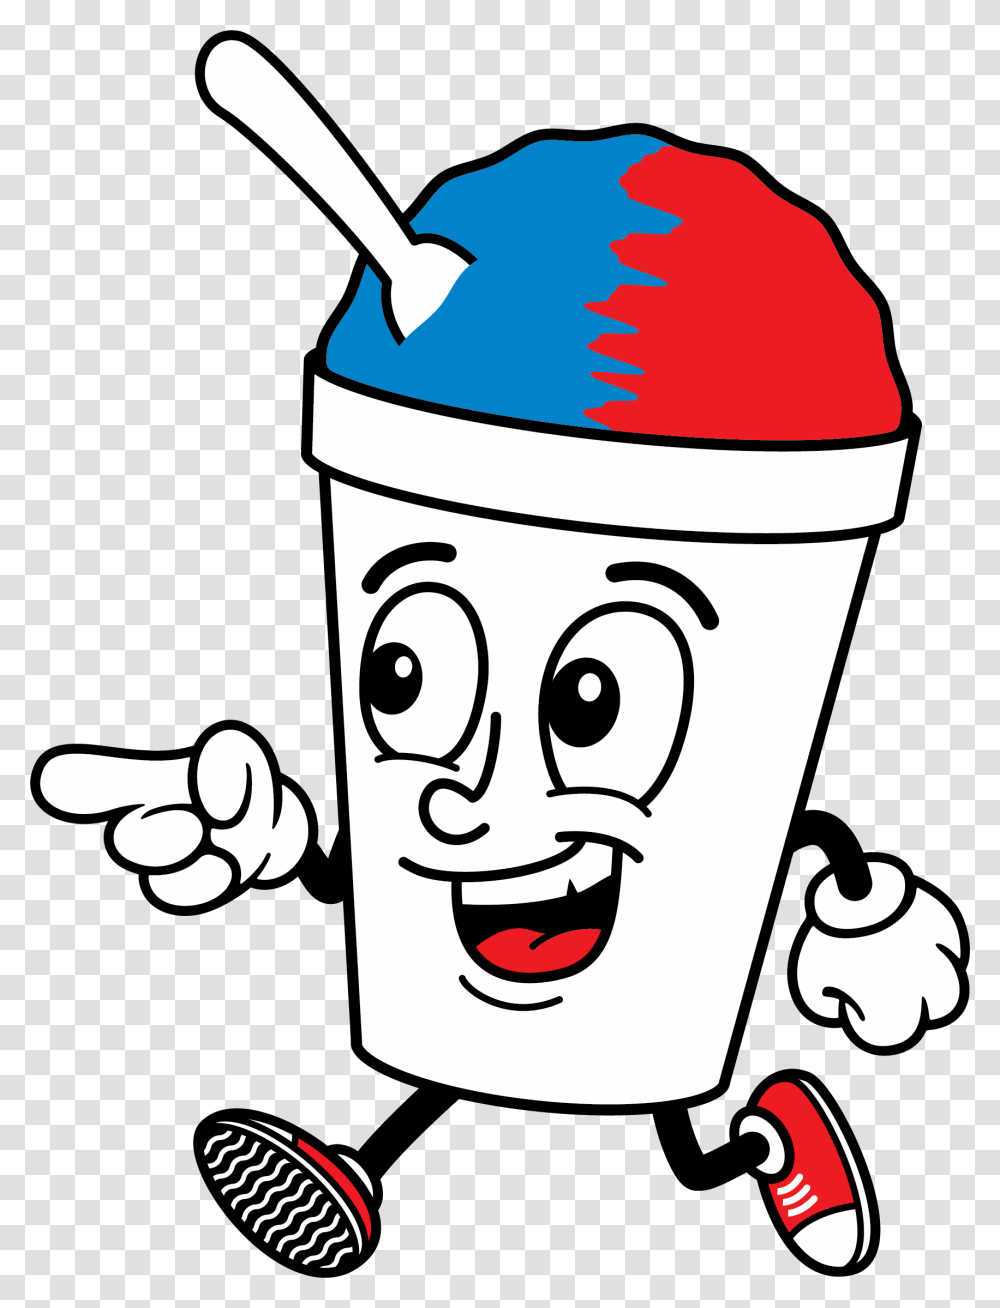 Gringos Shaved Ice Shave Ice Snow Cone Clip Art, Bottle, Shaker, Stencil, Cup Transparent Png